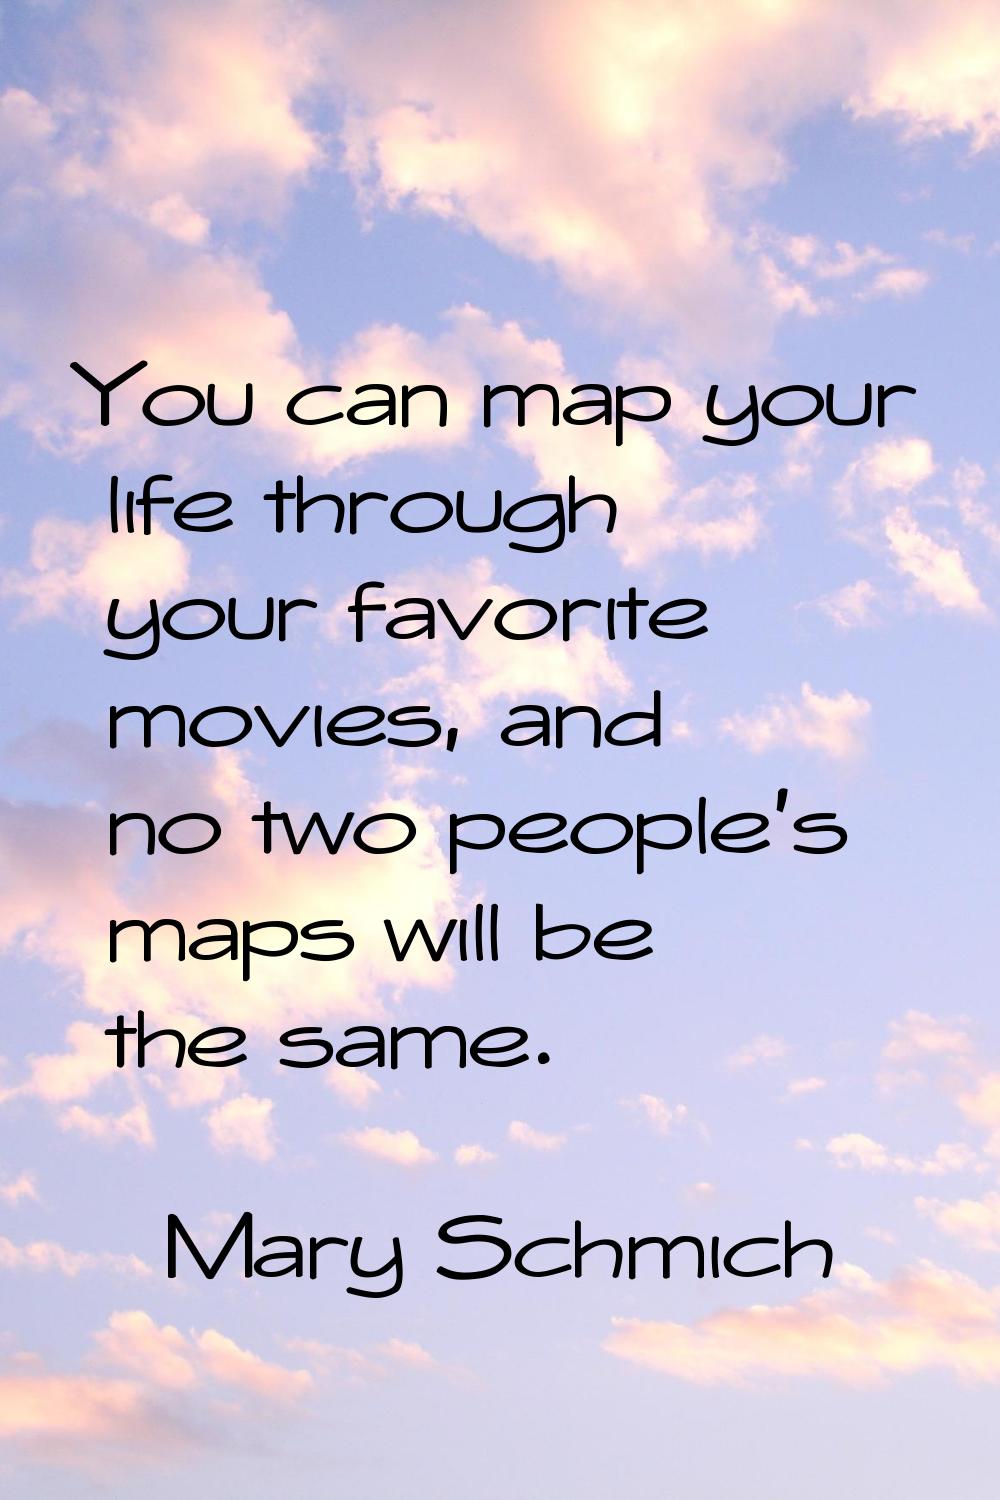 You can map your life through your favorite movies, and no two people's maps will be the same.